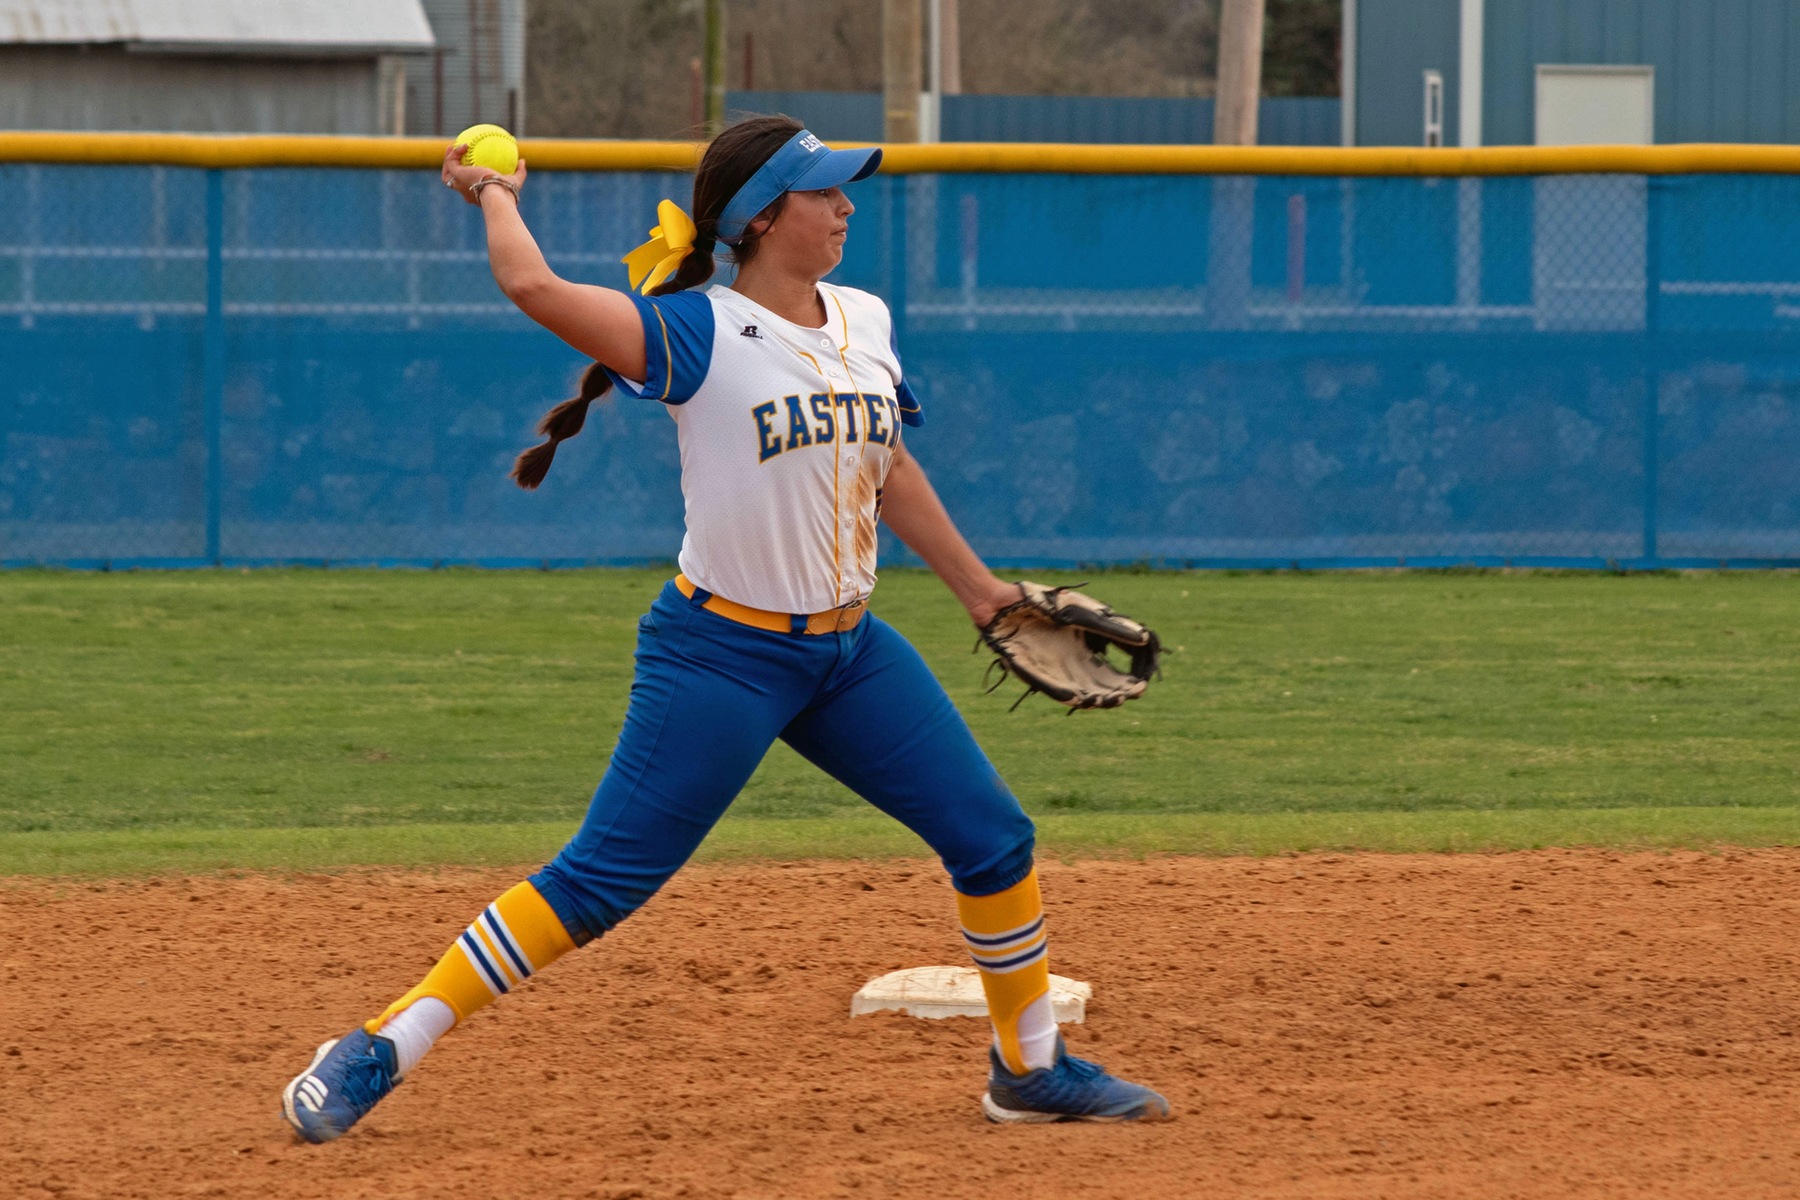 Eastern Softball Defeats Connors State College and Wins Season Series 3 Games to 1